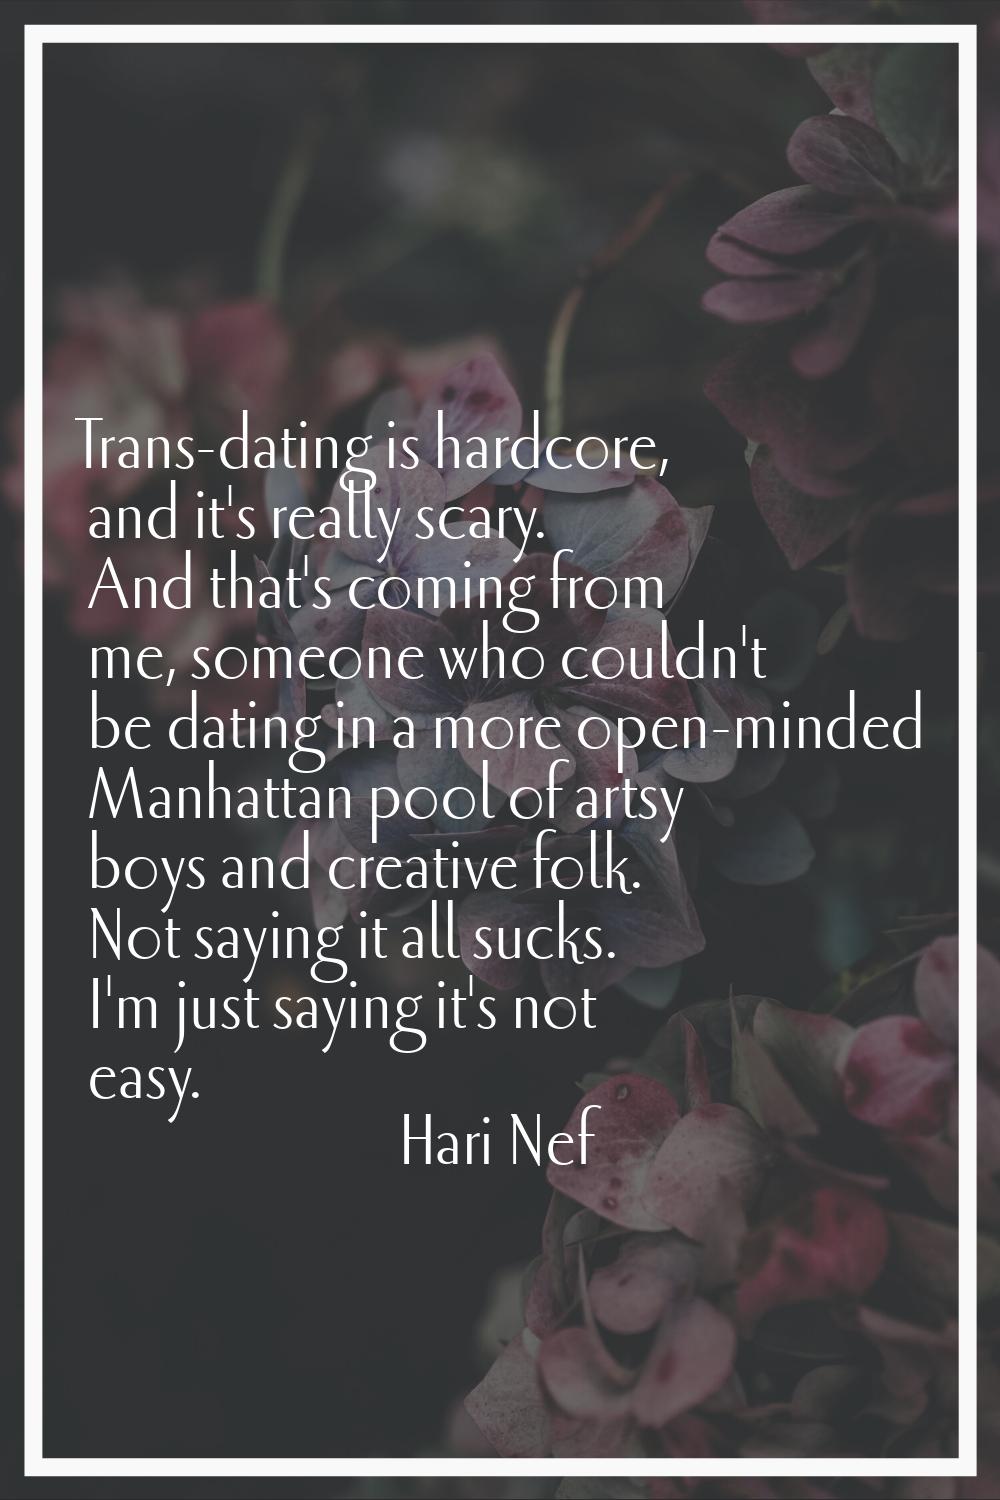 Trans-dating is hardcore, and it's really scary. And that's coming from me, someone who couldn't be